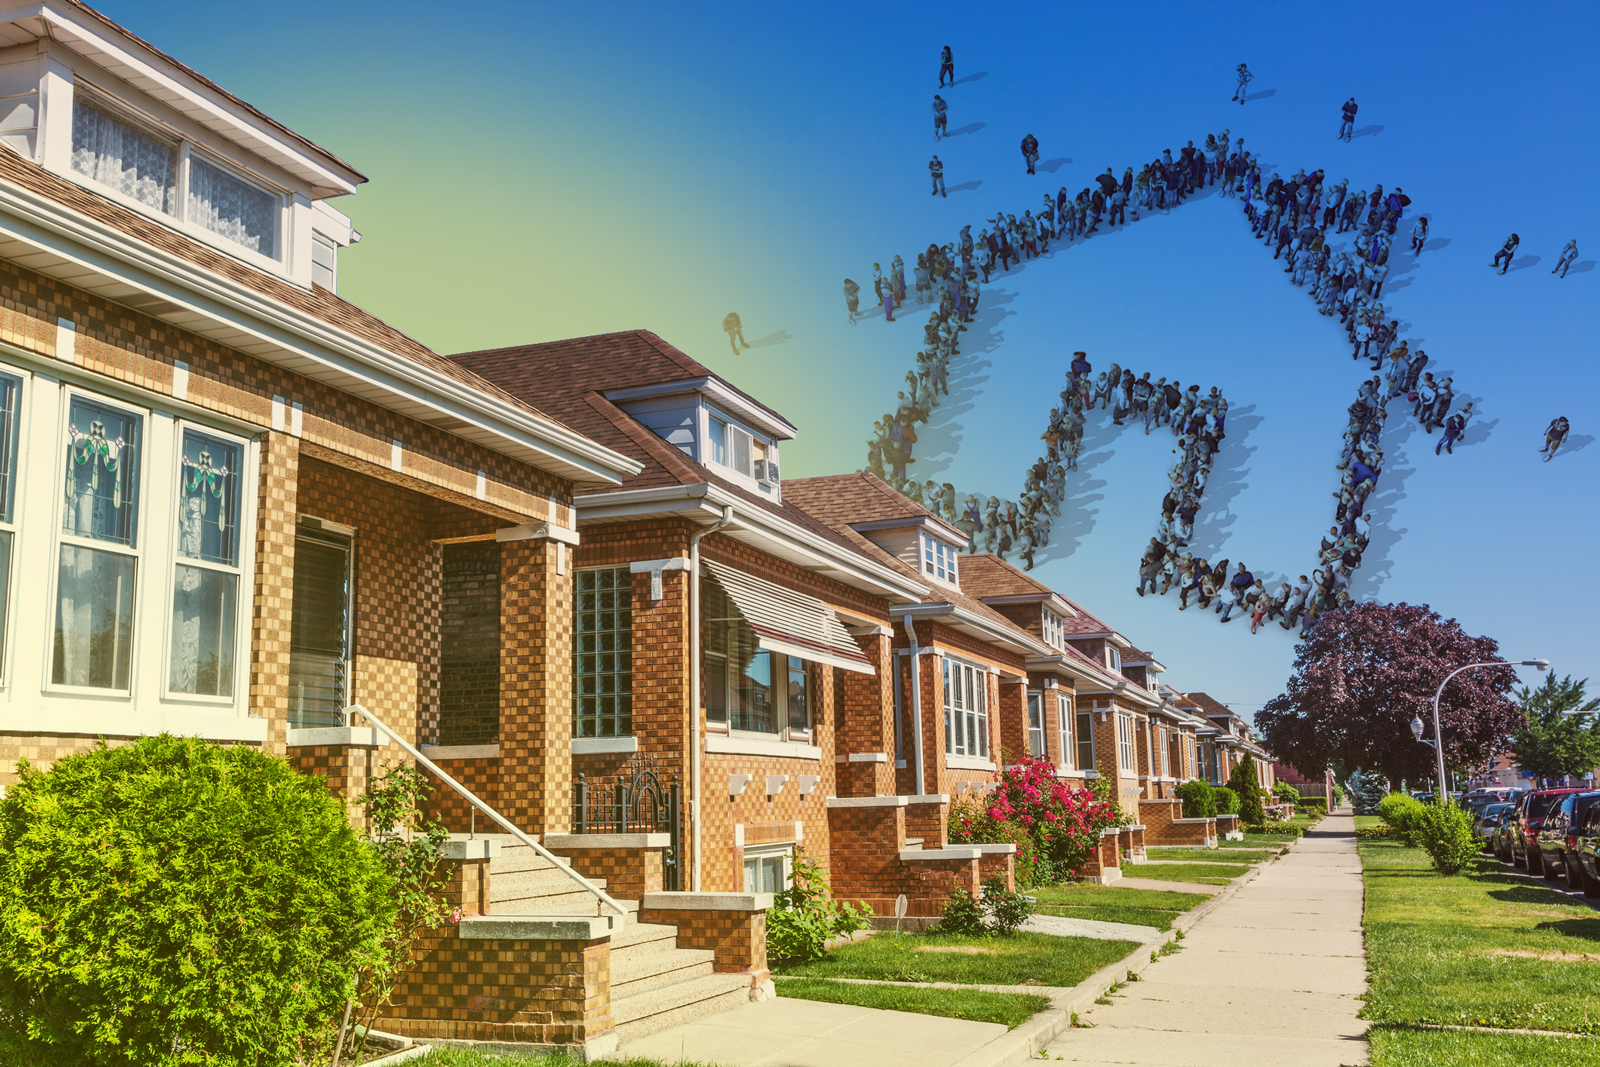  The Chicago housing market is seeing an uptick in contracts signed and in the number of open houses, as buyers and sellers get off the sidelines. (iStock)